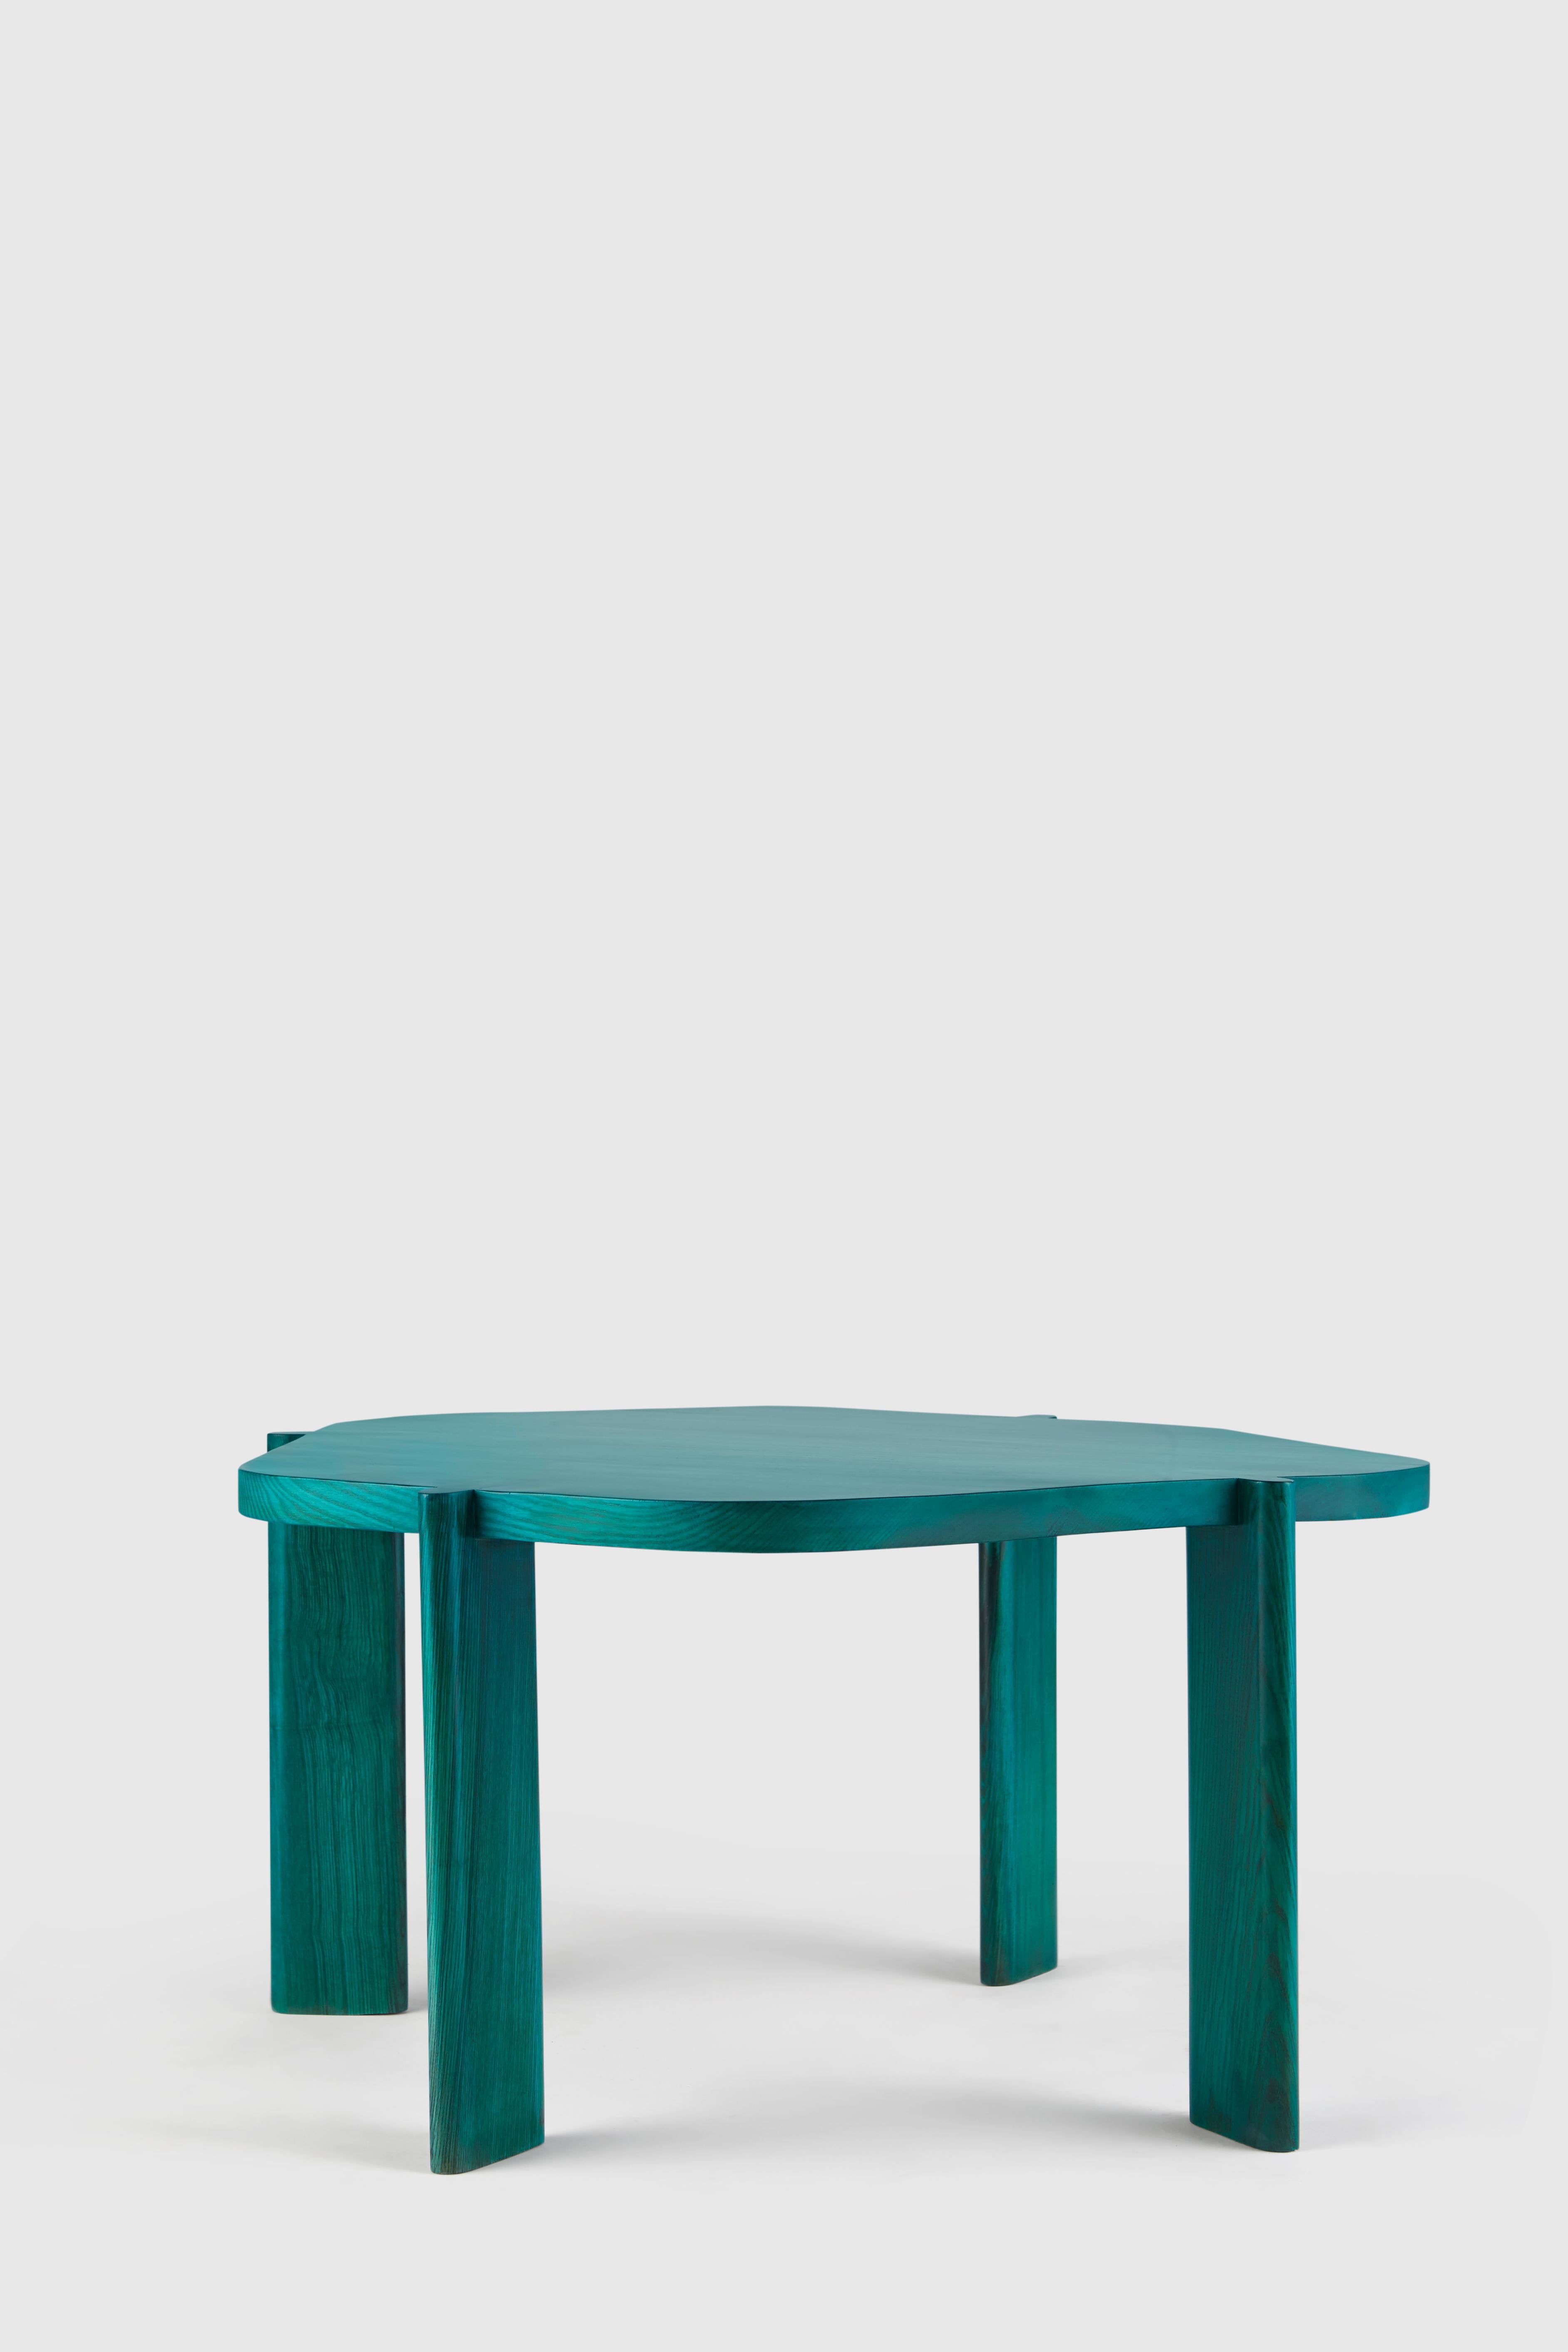 Indian Unique Oak Wood Hex Table by Hatsu For Sale